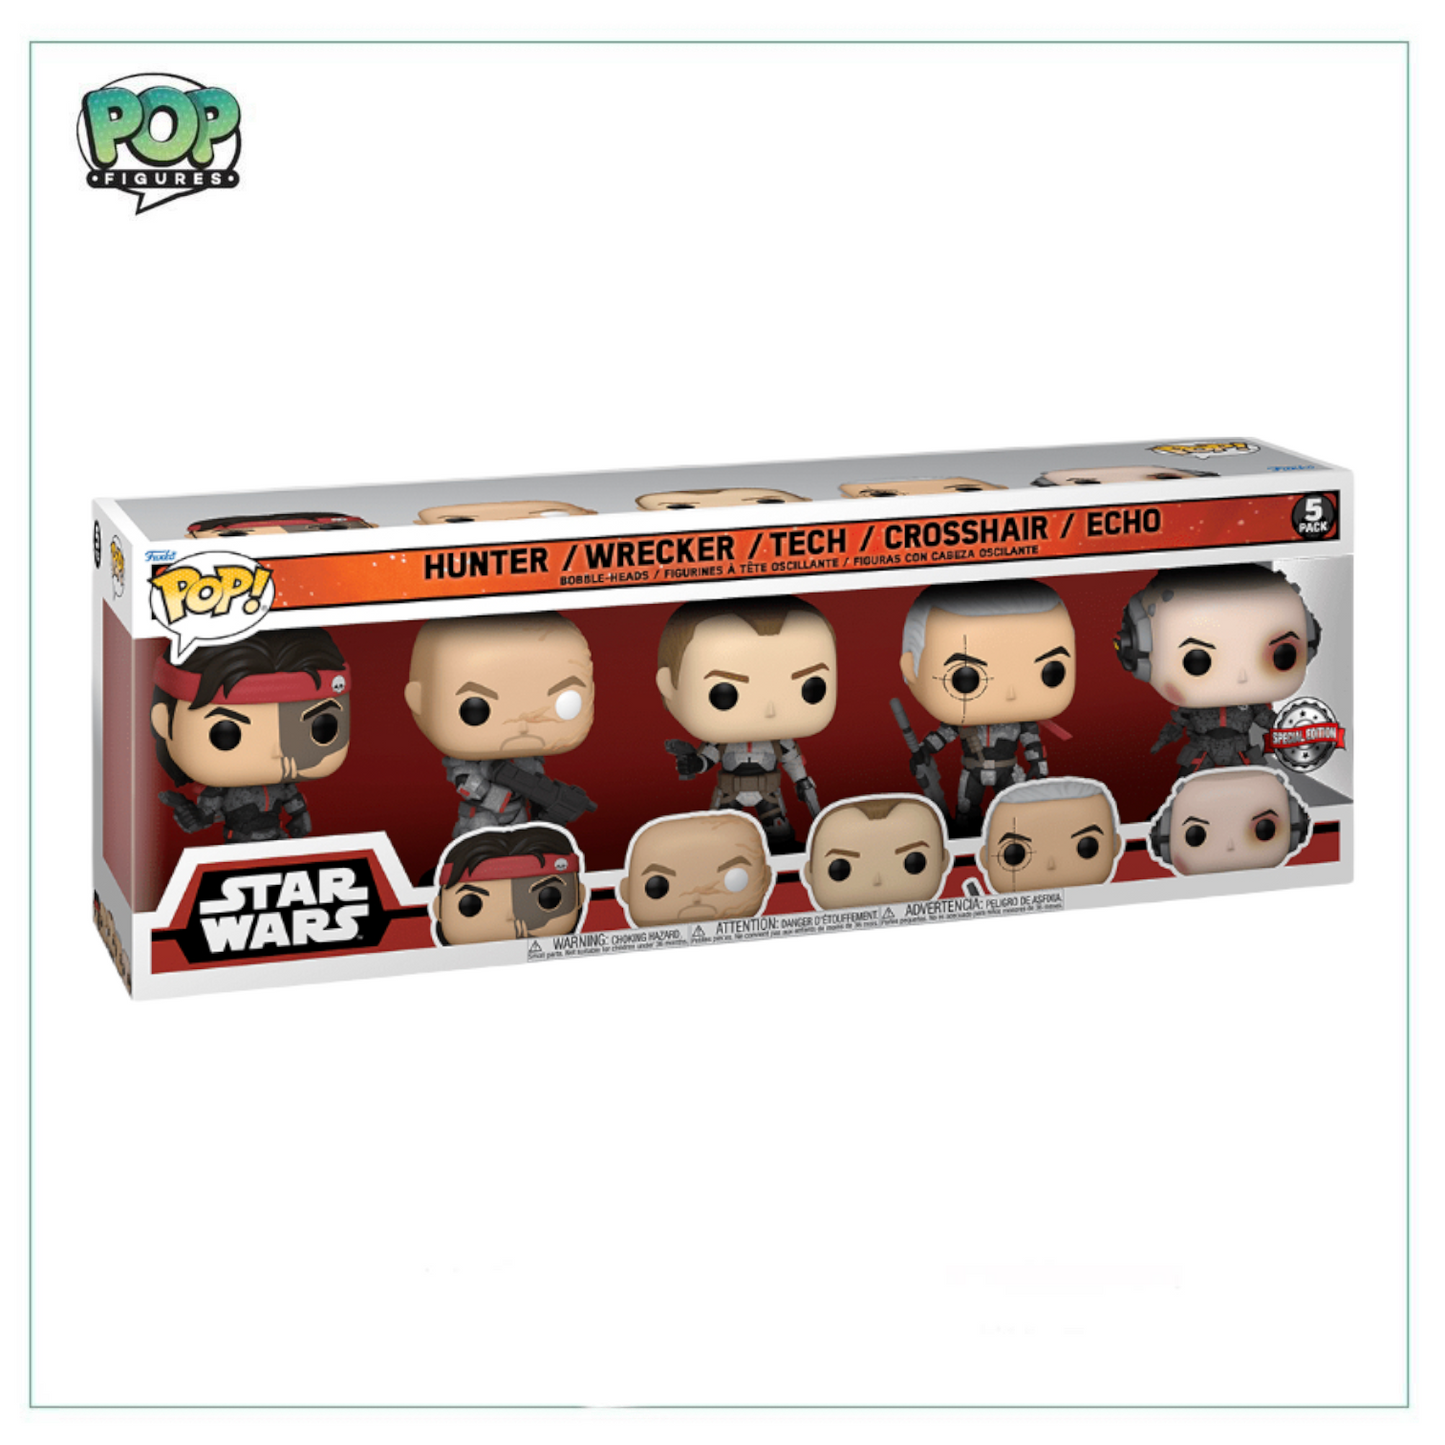 Hunter / Wrecker / Tech / Crosshair / Echo - Funko Deluxe 5 Pack! Star Wars - Special Edition - Angry Cat